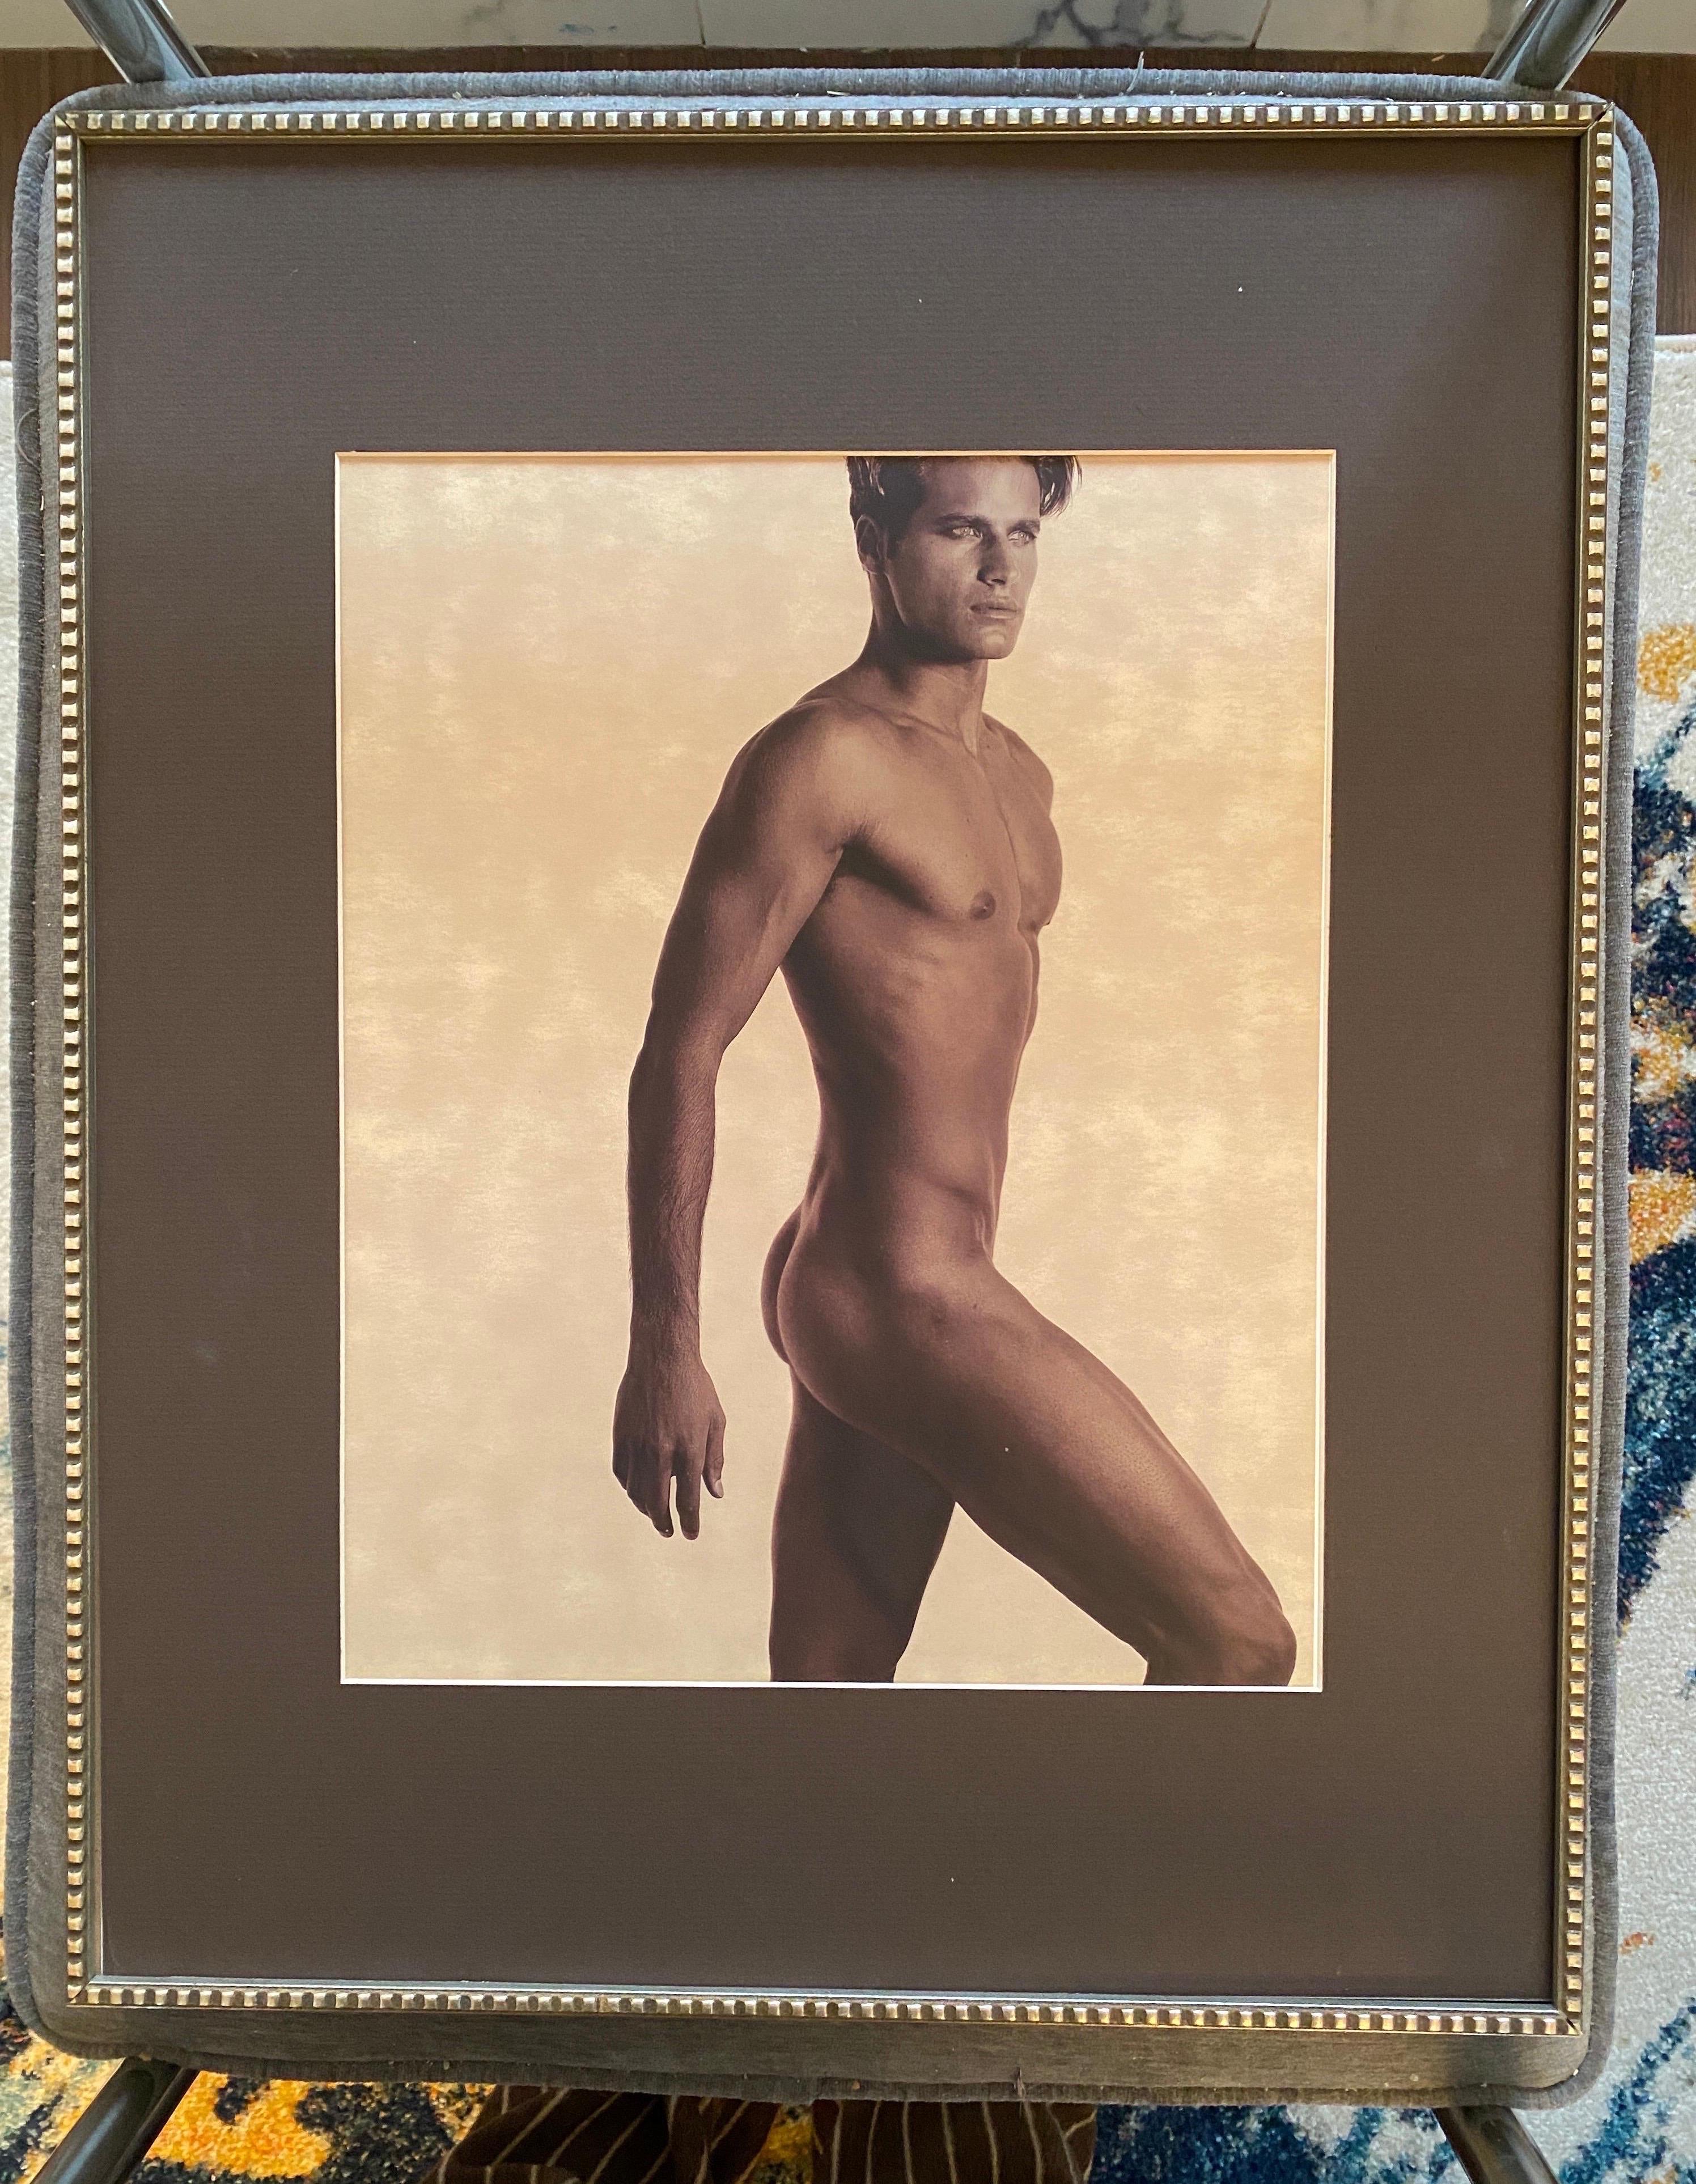 Karl Lagerfeld photograph of the beautiful David Miller, 1997.

This beautiful male nude of model David Miller was included in a boxed series of photograph lithographs of nude models/celebrities done for Visionaire, NYC published in 1997. These